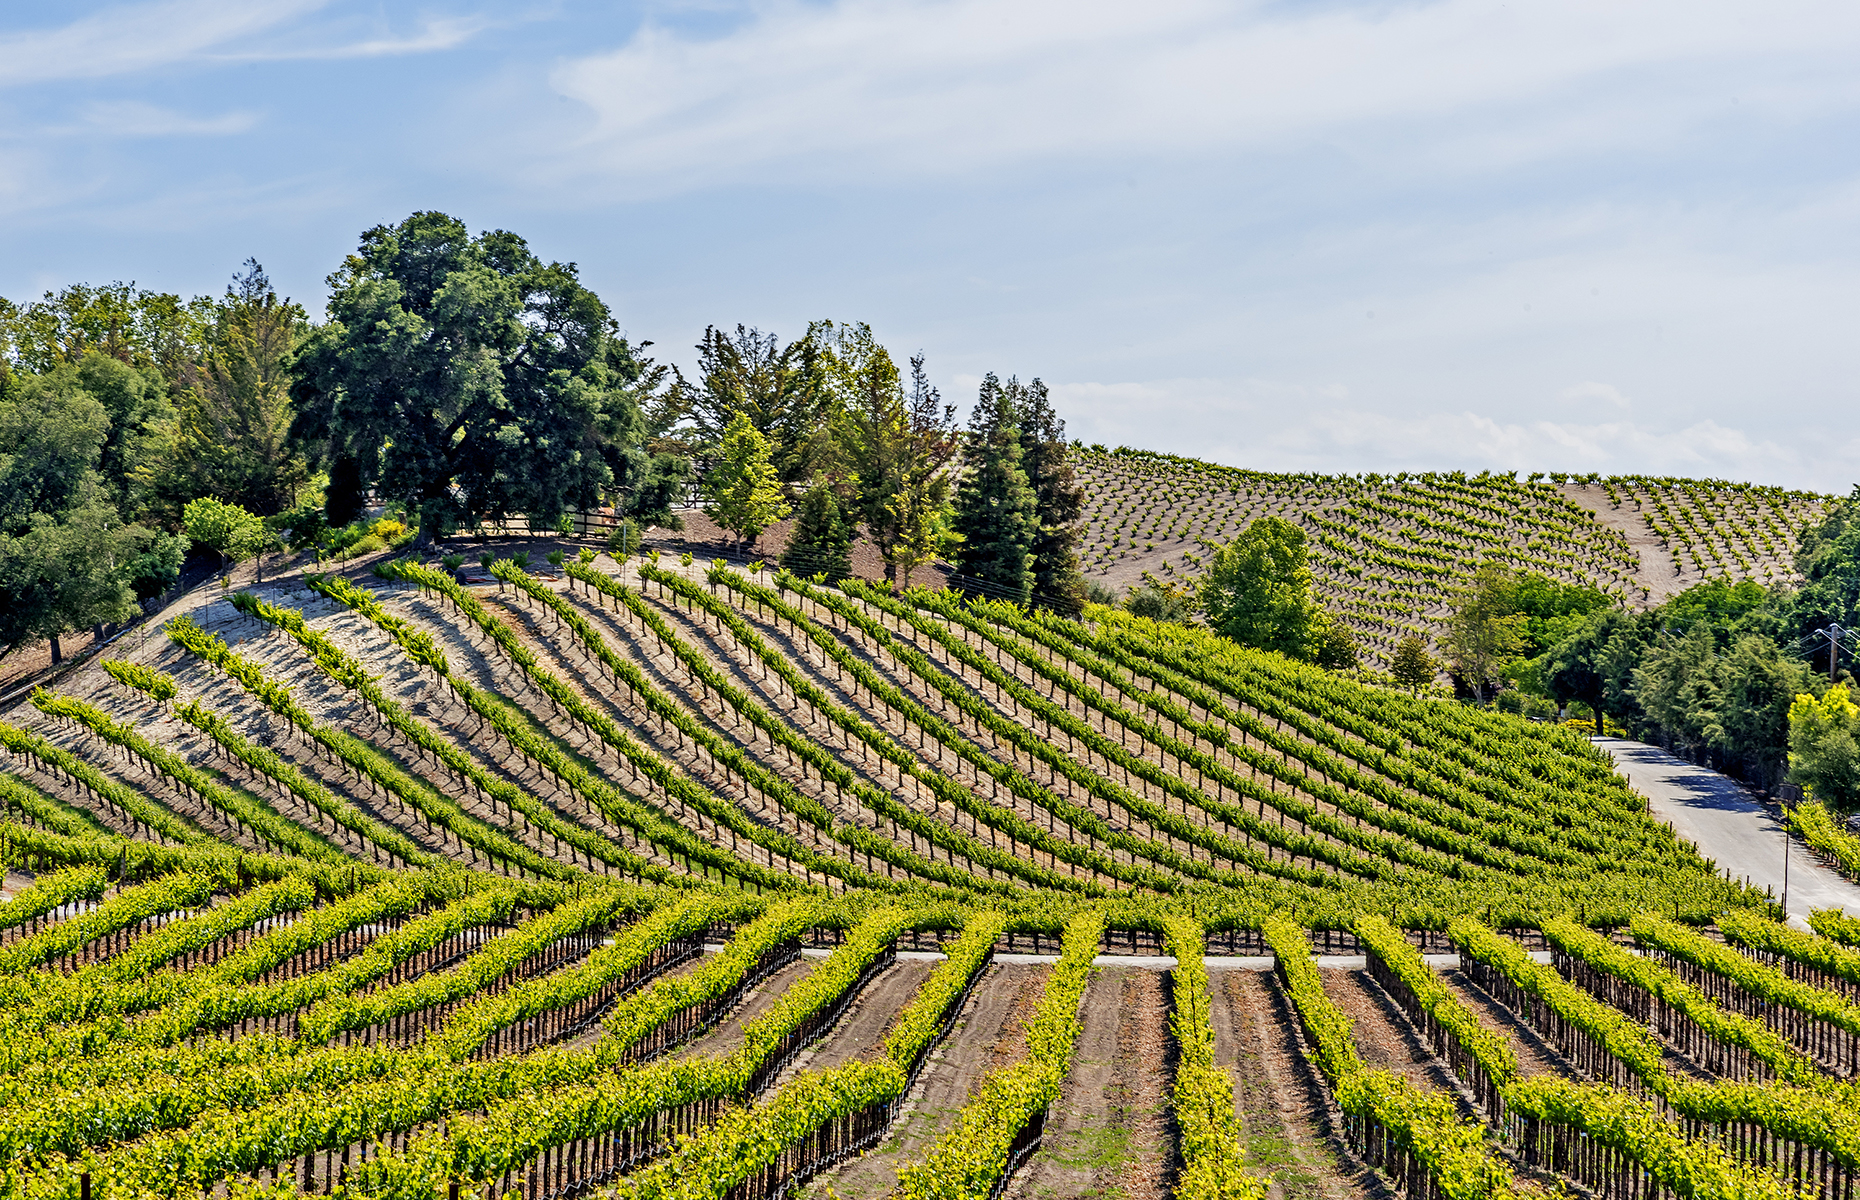 Vineyards in Paso Roble (Image: randy andy/Shutterstock)